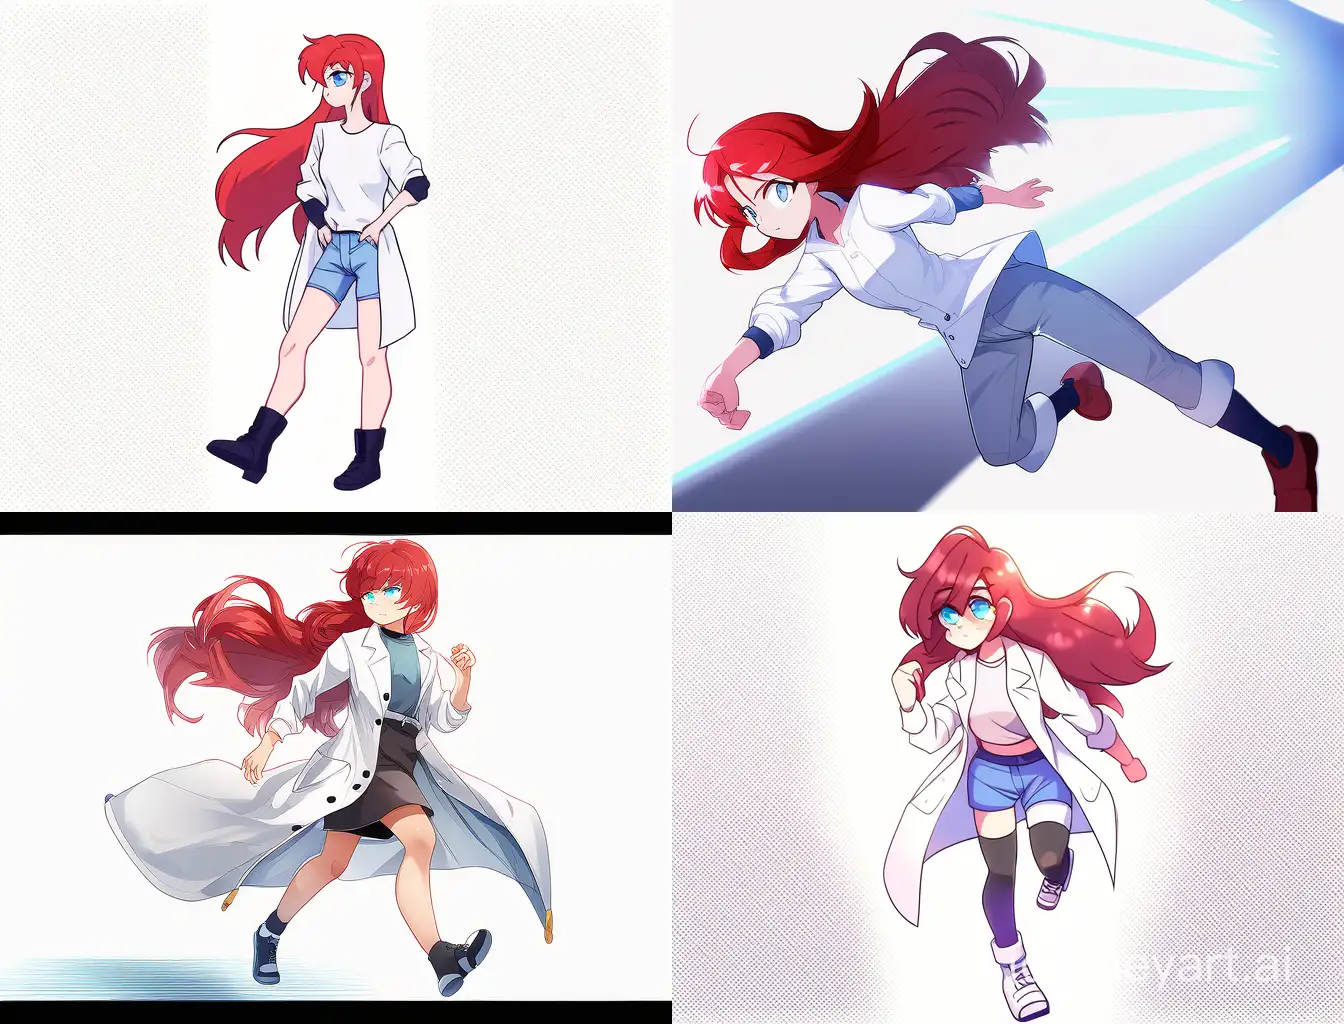 Stylish-Anime-Girl-with-Red-Hair-and-Blue-Eyes-in-Lab-Coat-and-Shorts